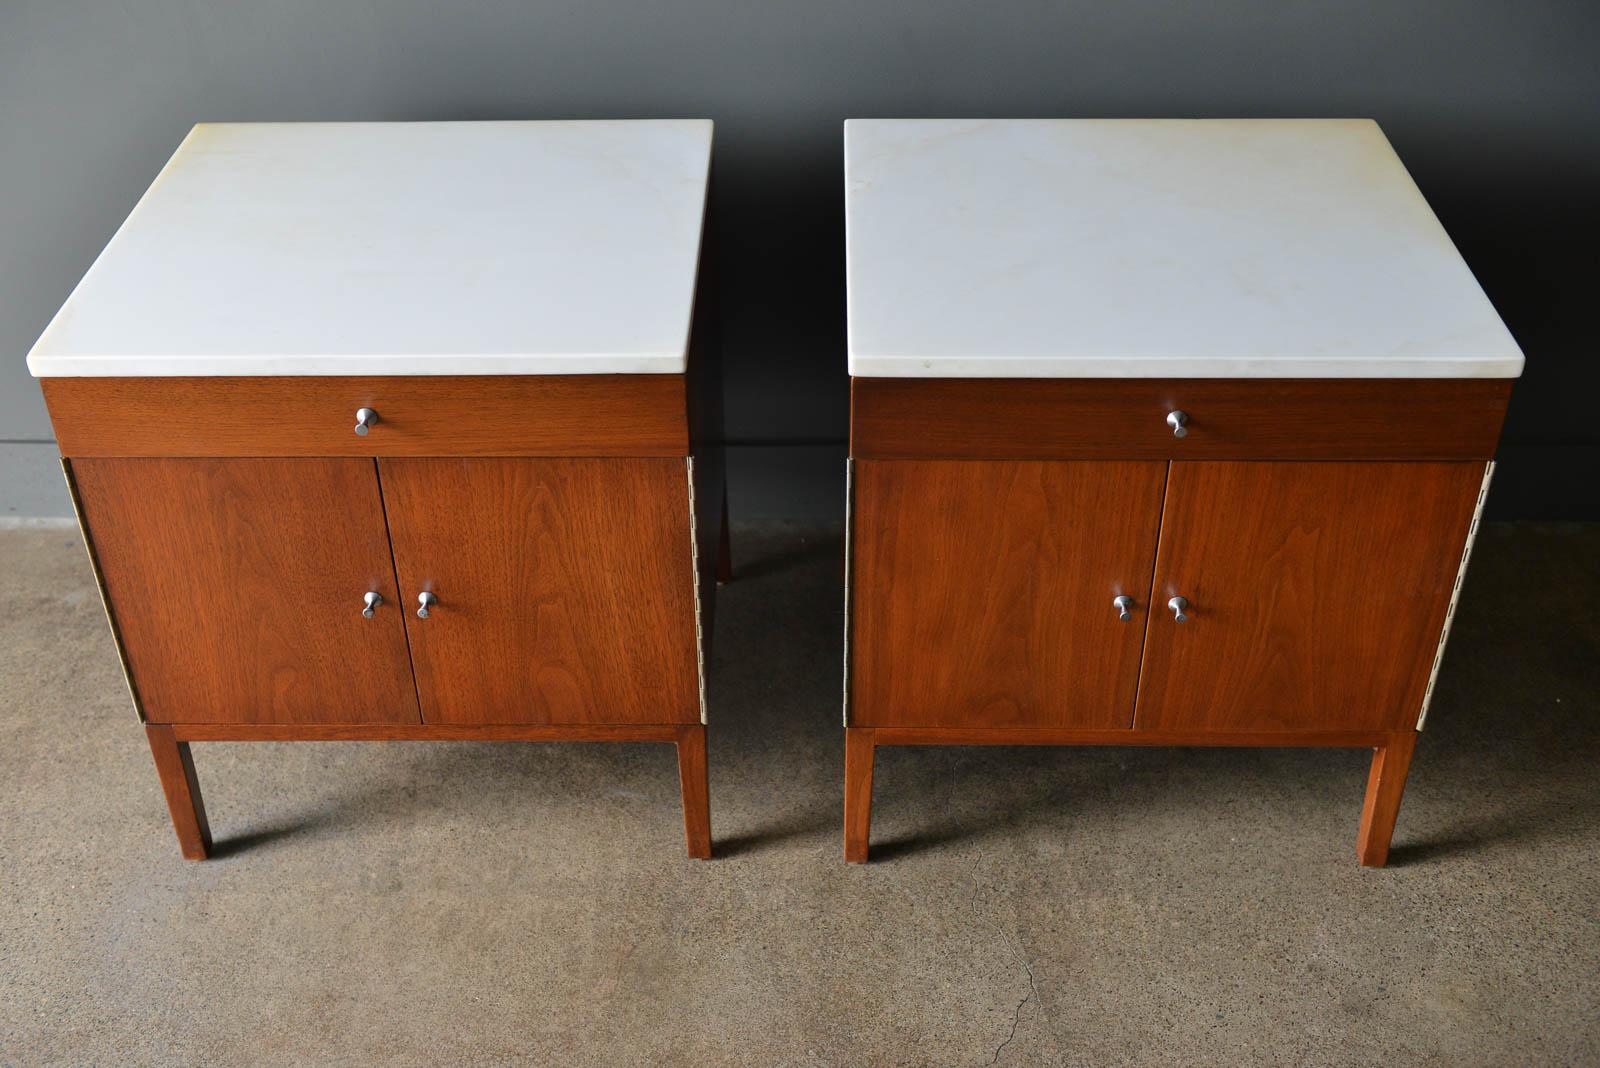 American Pair of Paul McCobb Walnut and Marble Nightstands or End Tables, circa 1960